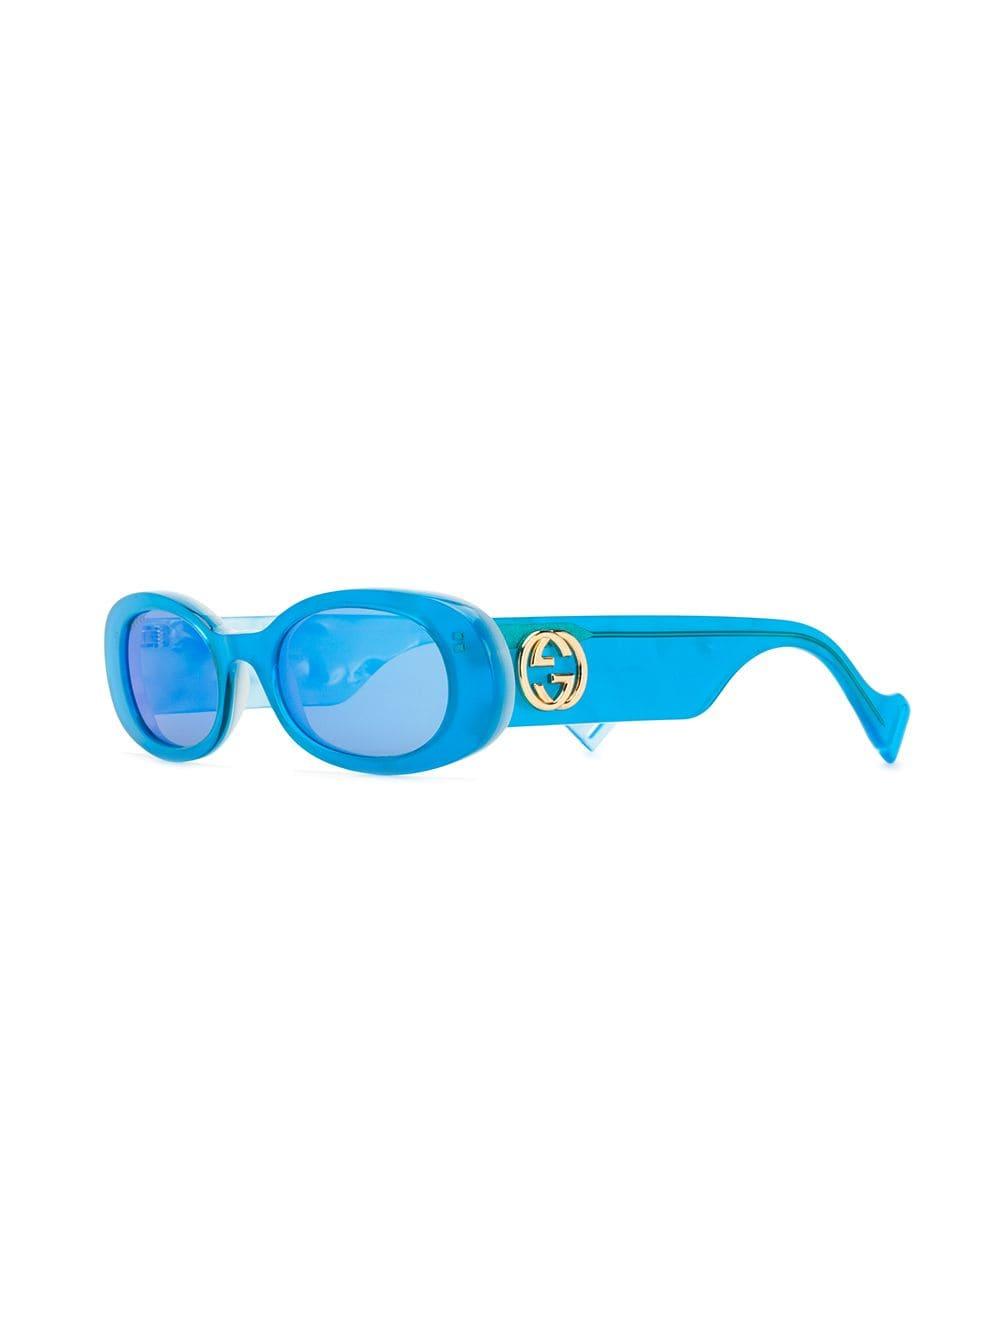 Gucci Oval Frame Sunglasses in Blue - Lyst